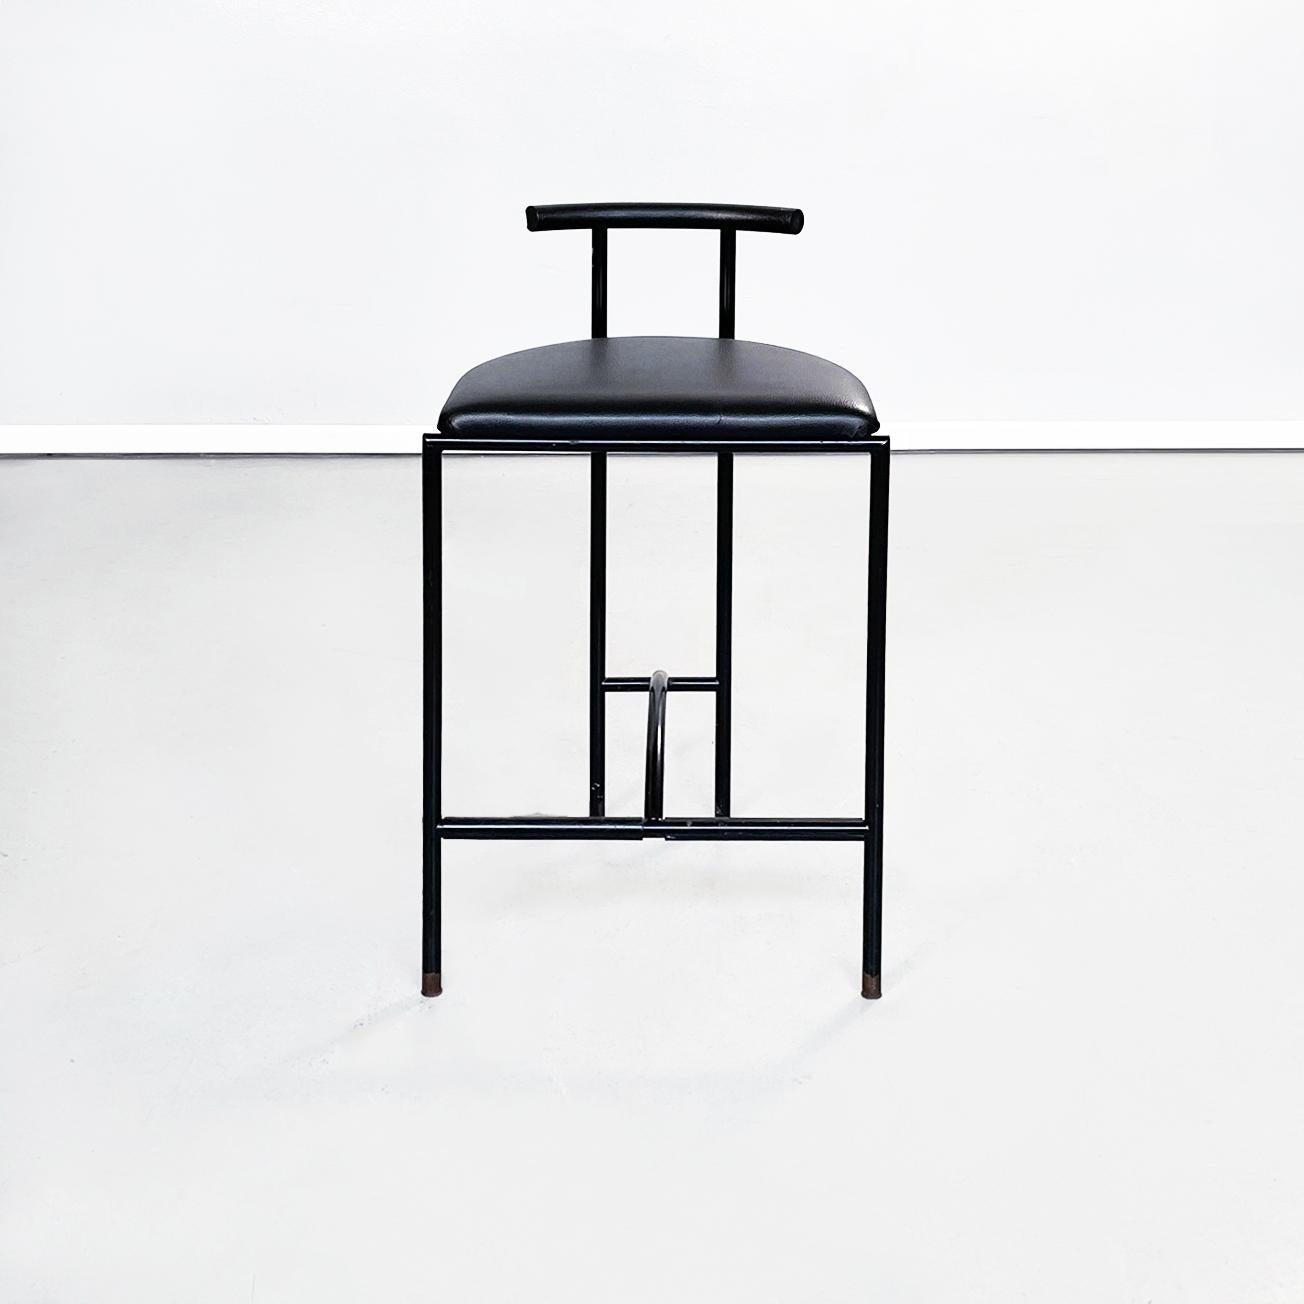 Italian mid-century black leather stools Tokyo by Kinsman for Bieffeplast, 1980s
Set of 4 stools mod. Tokyo with semicircular seat upholstered and covered in black leather. The curved back is made of rubber. The structure in tubular steel, painted